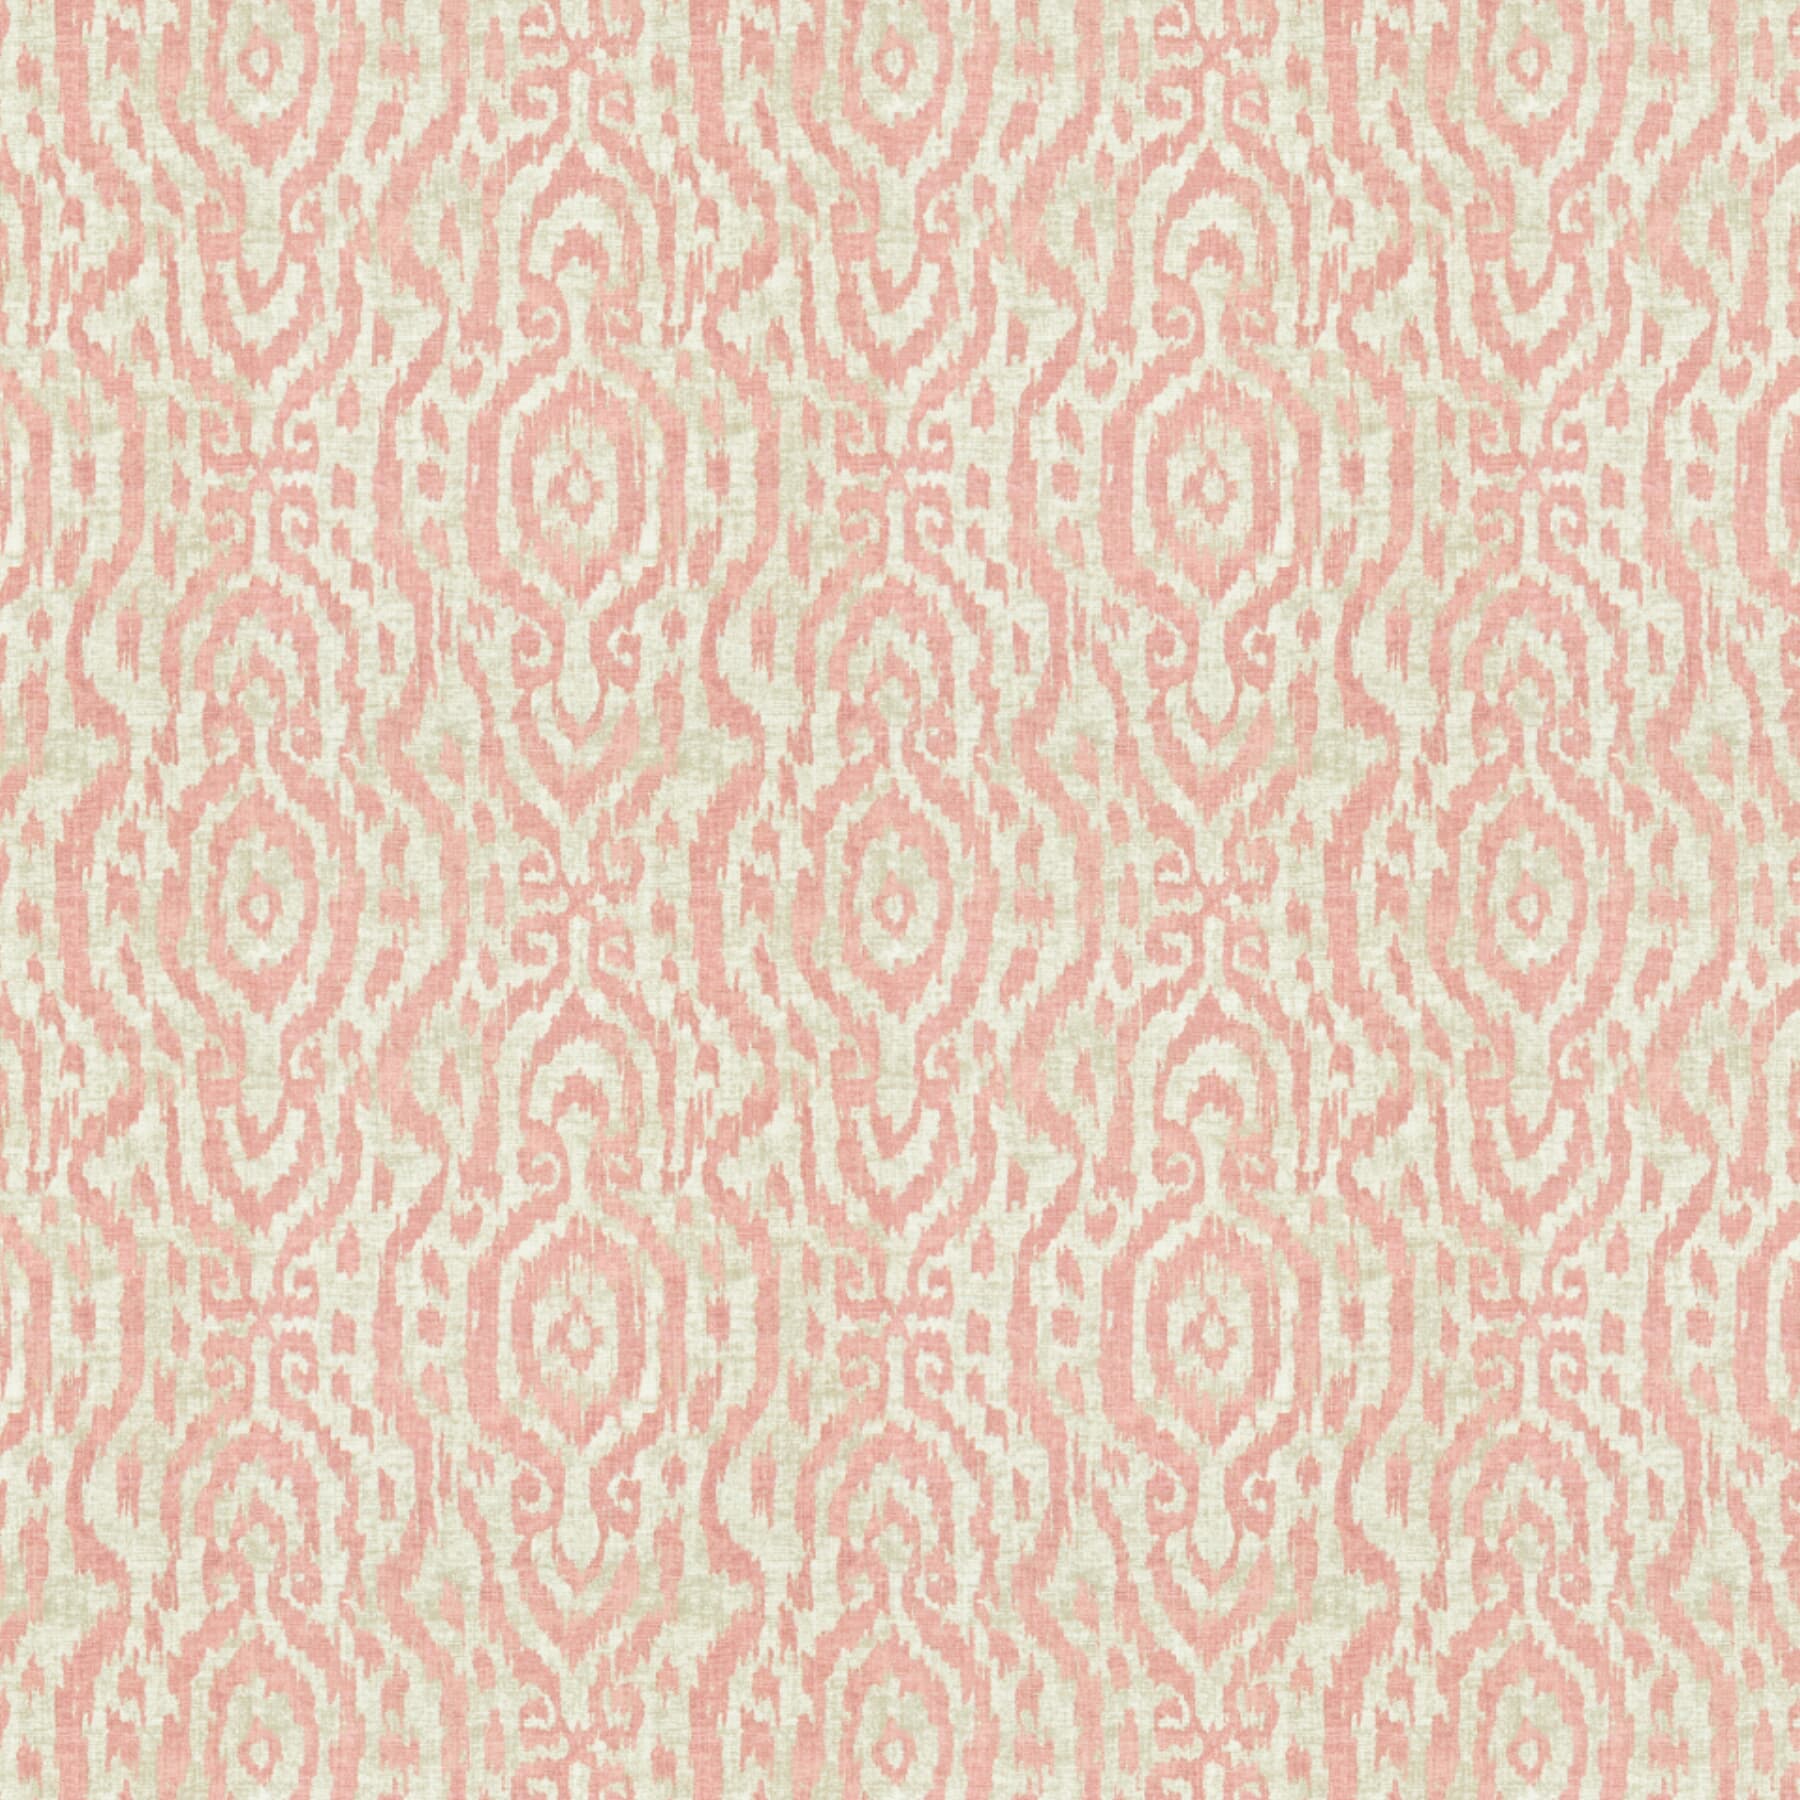 Outten 1 Sorbet by Stout Fabric